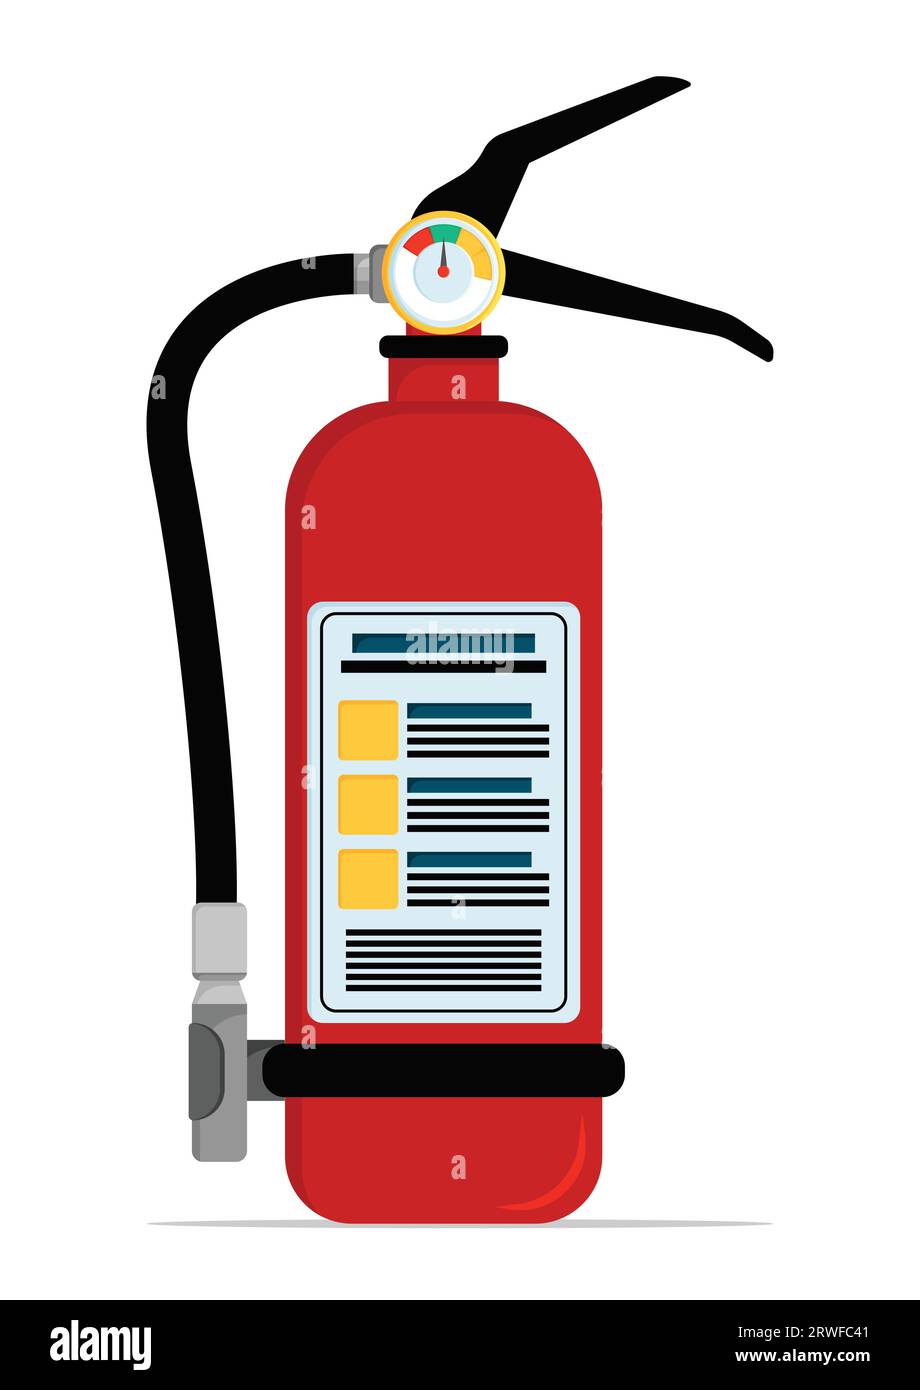 Fire Extinguisher in Flat Design. Emergency Response Equipment Vector Illustration Isolated on White Background Stock Vector